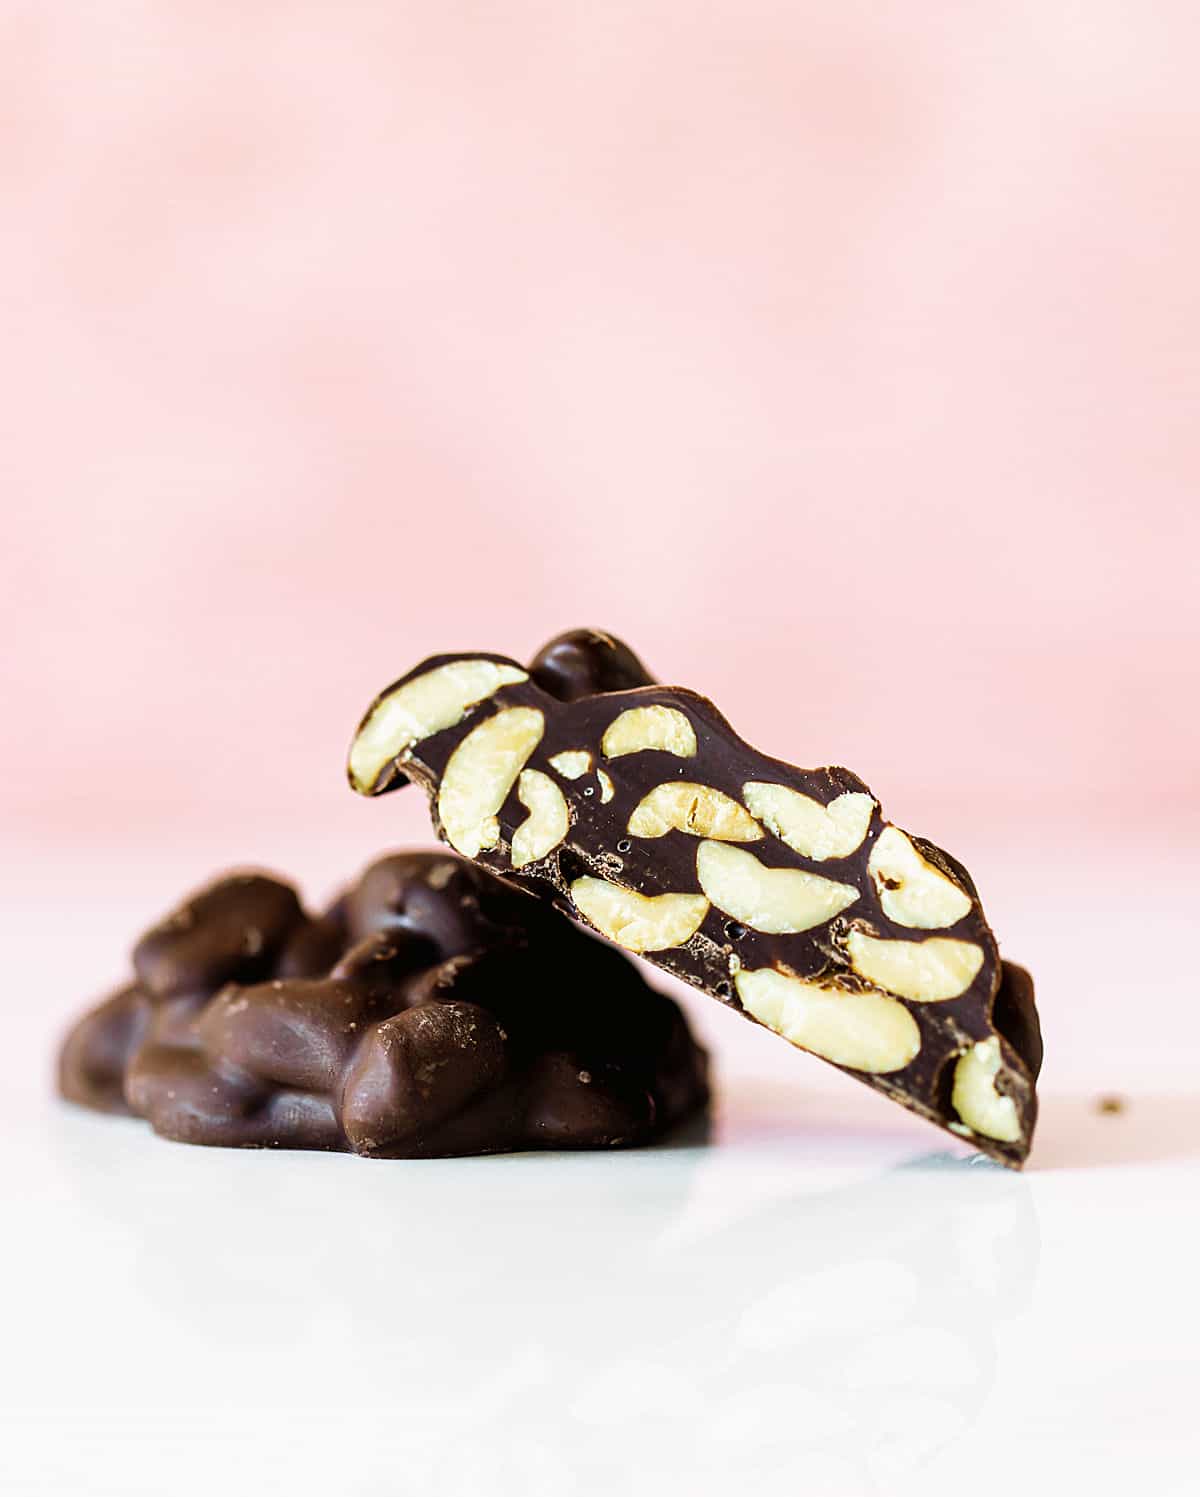 Cut and whole chocolate peanut clusters on white and pink background.